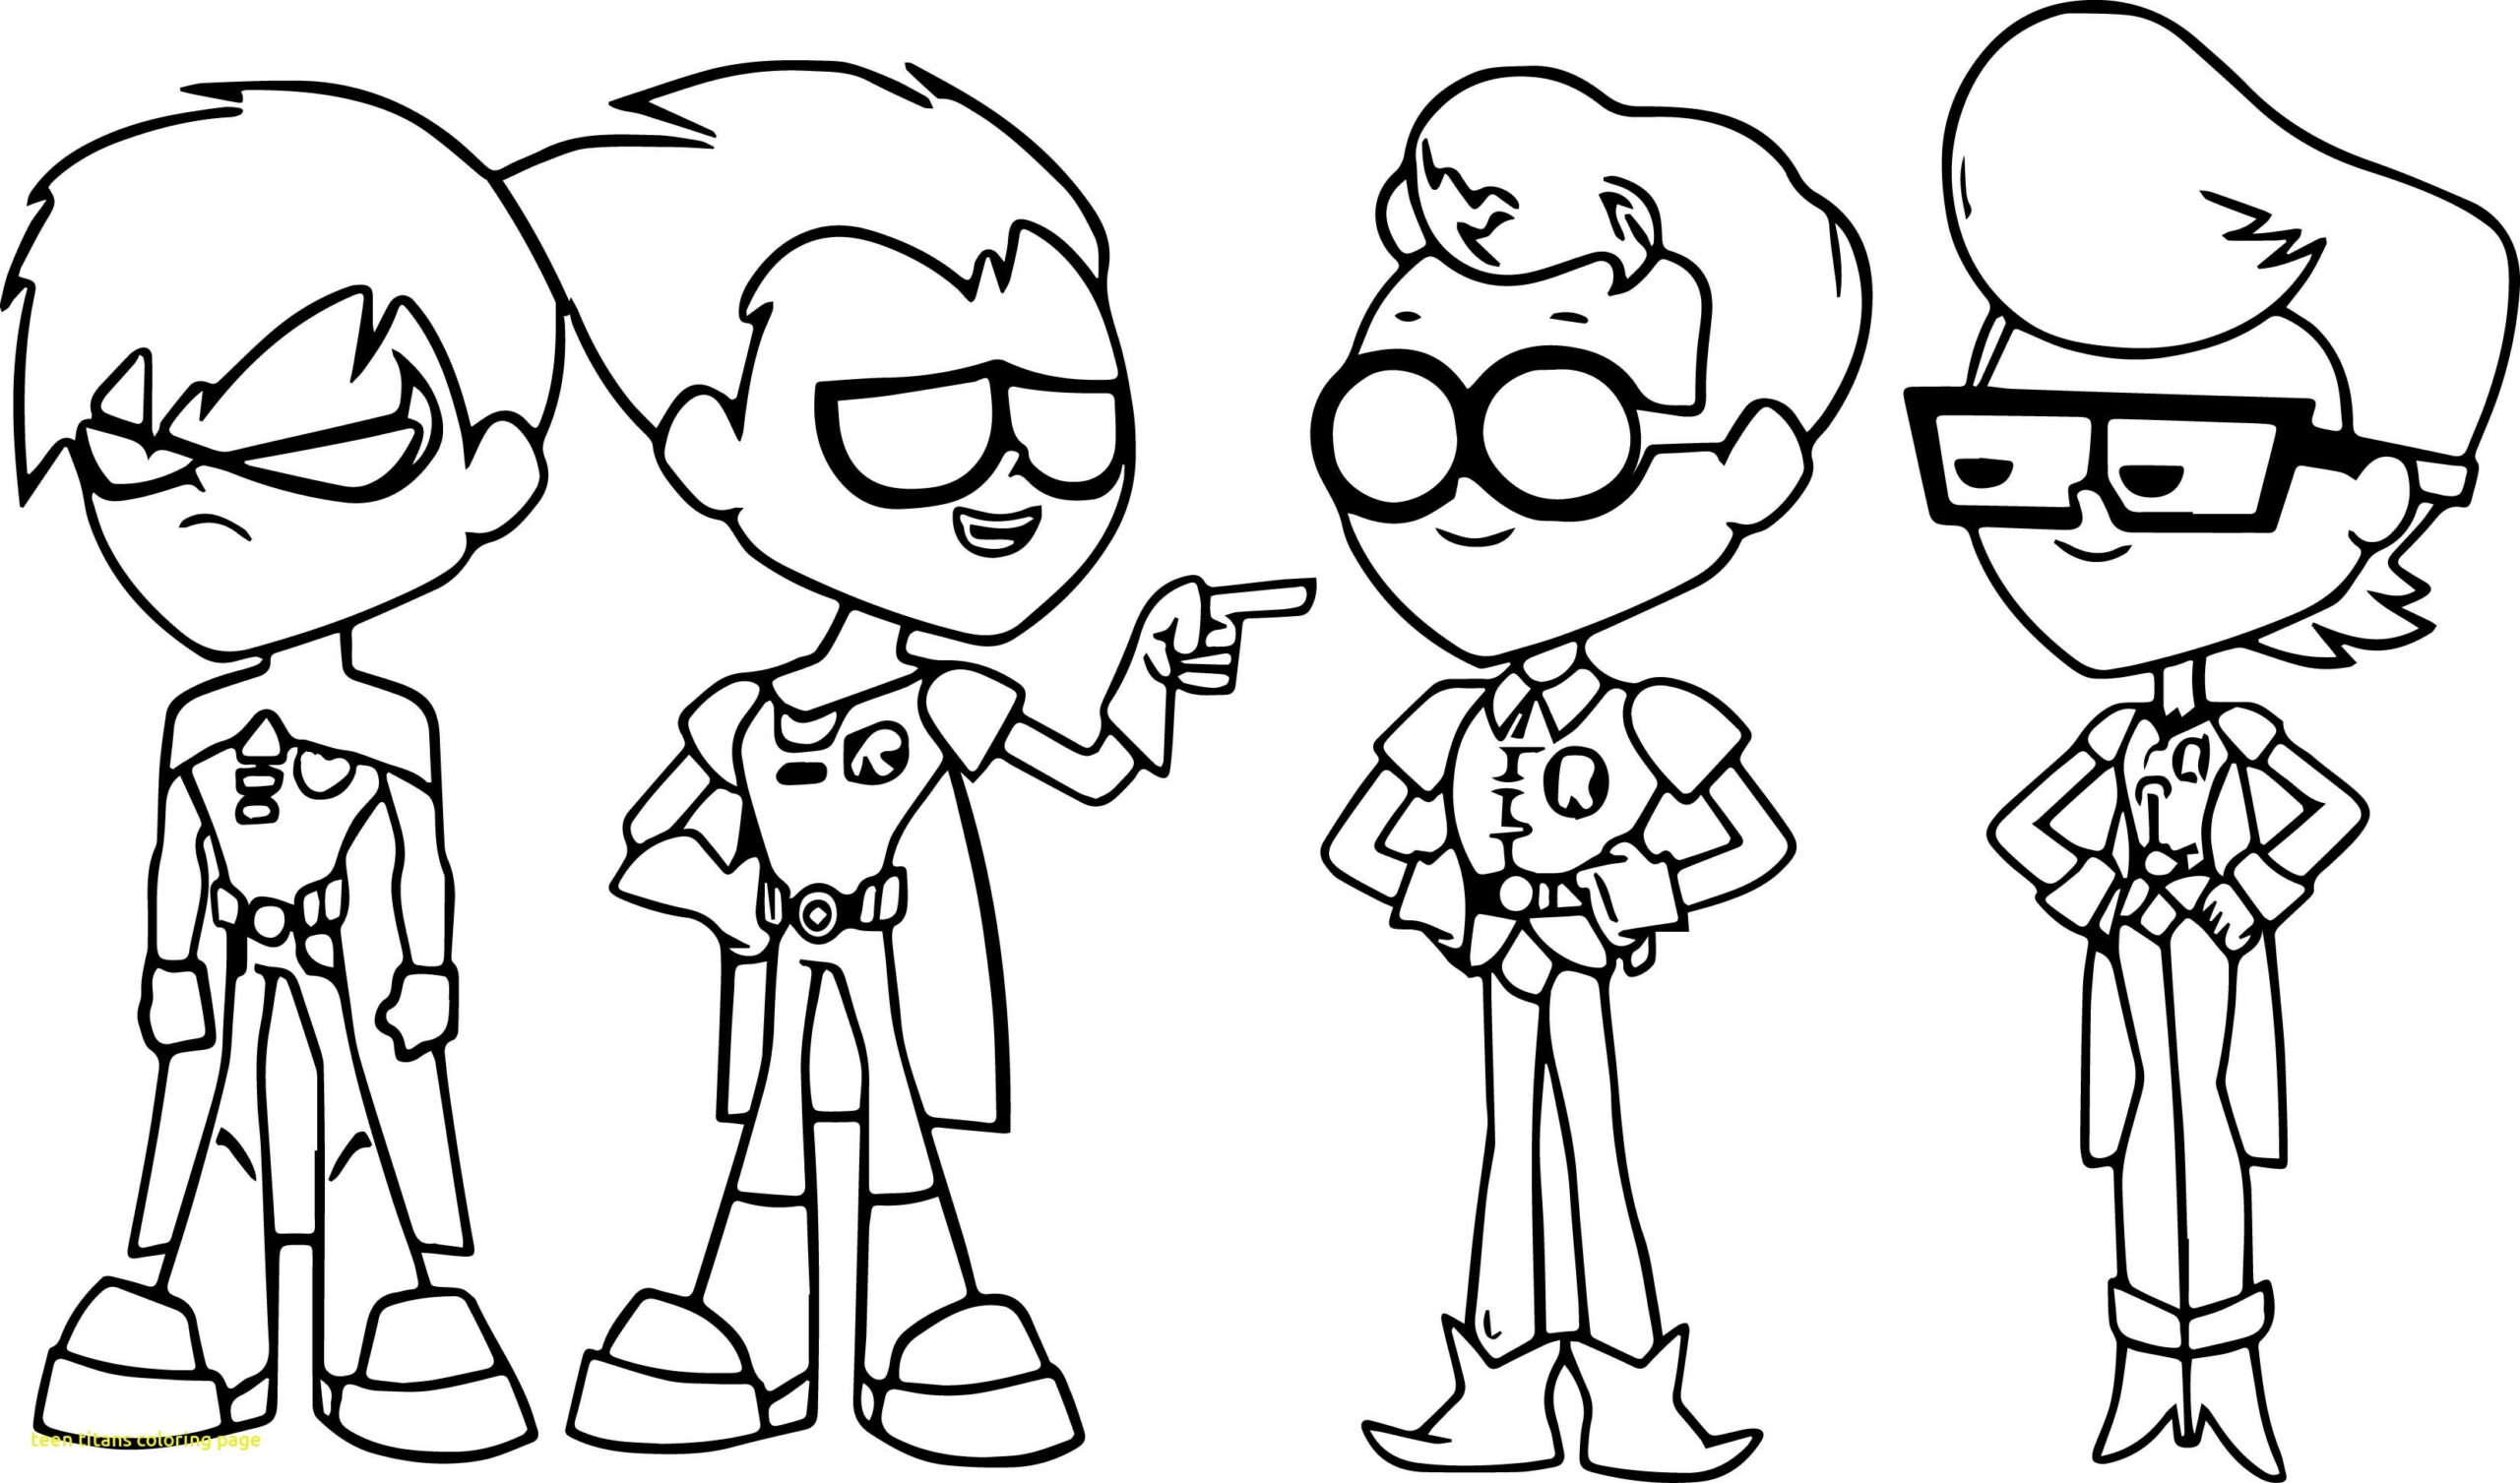 teen titans coloring page with image teen titans go episode 76 the best robin coloring page